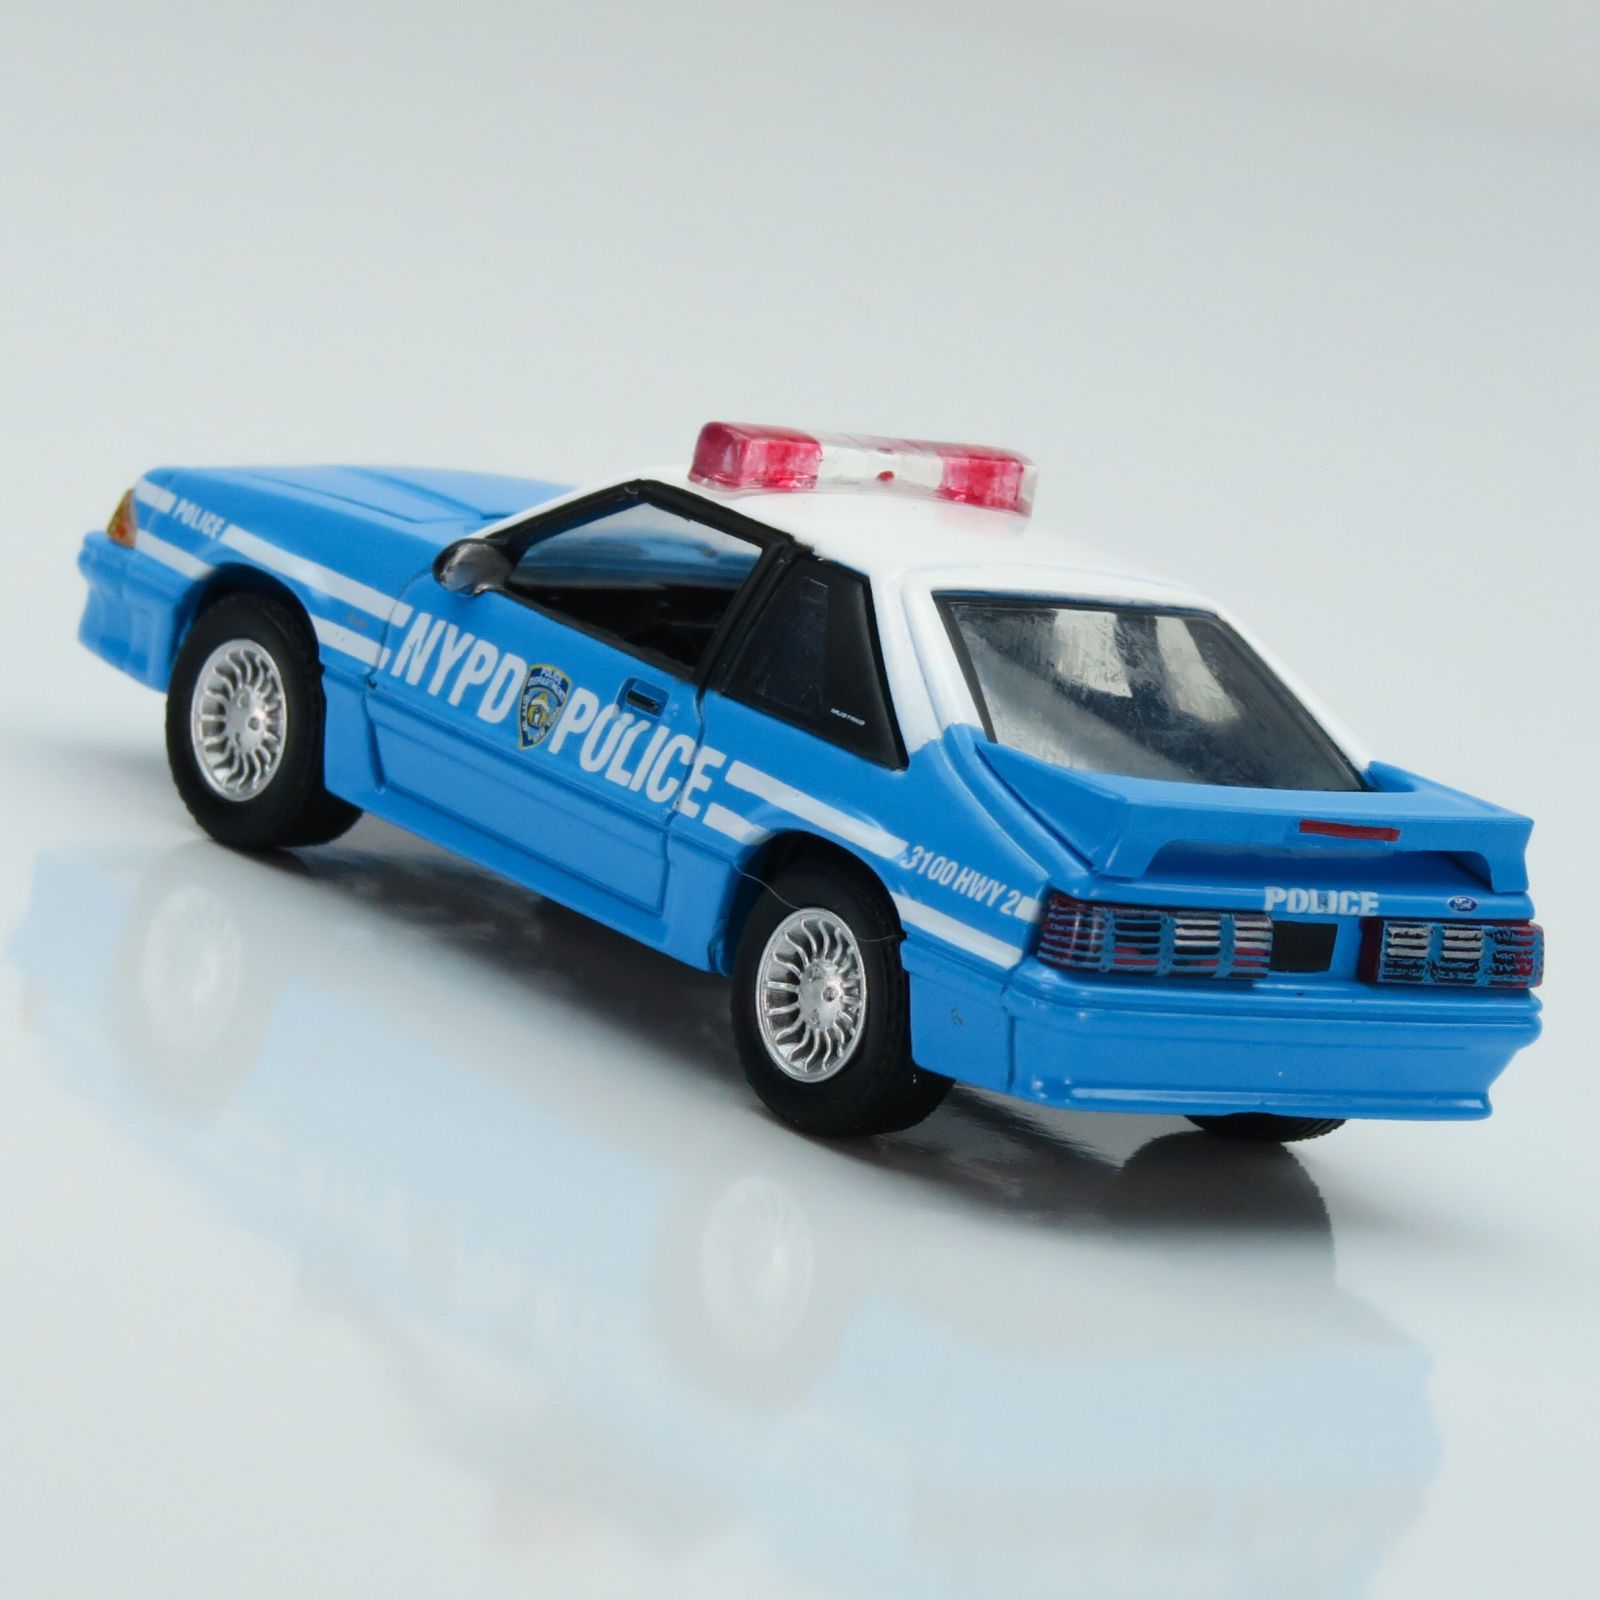 Illustration for article titled Video Review: GreenLight 87 Ford Mustang GT NYPD